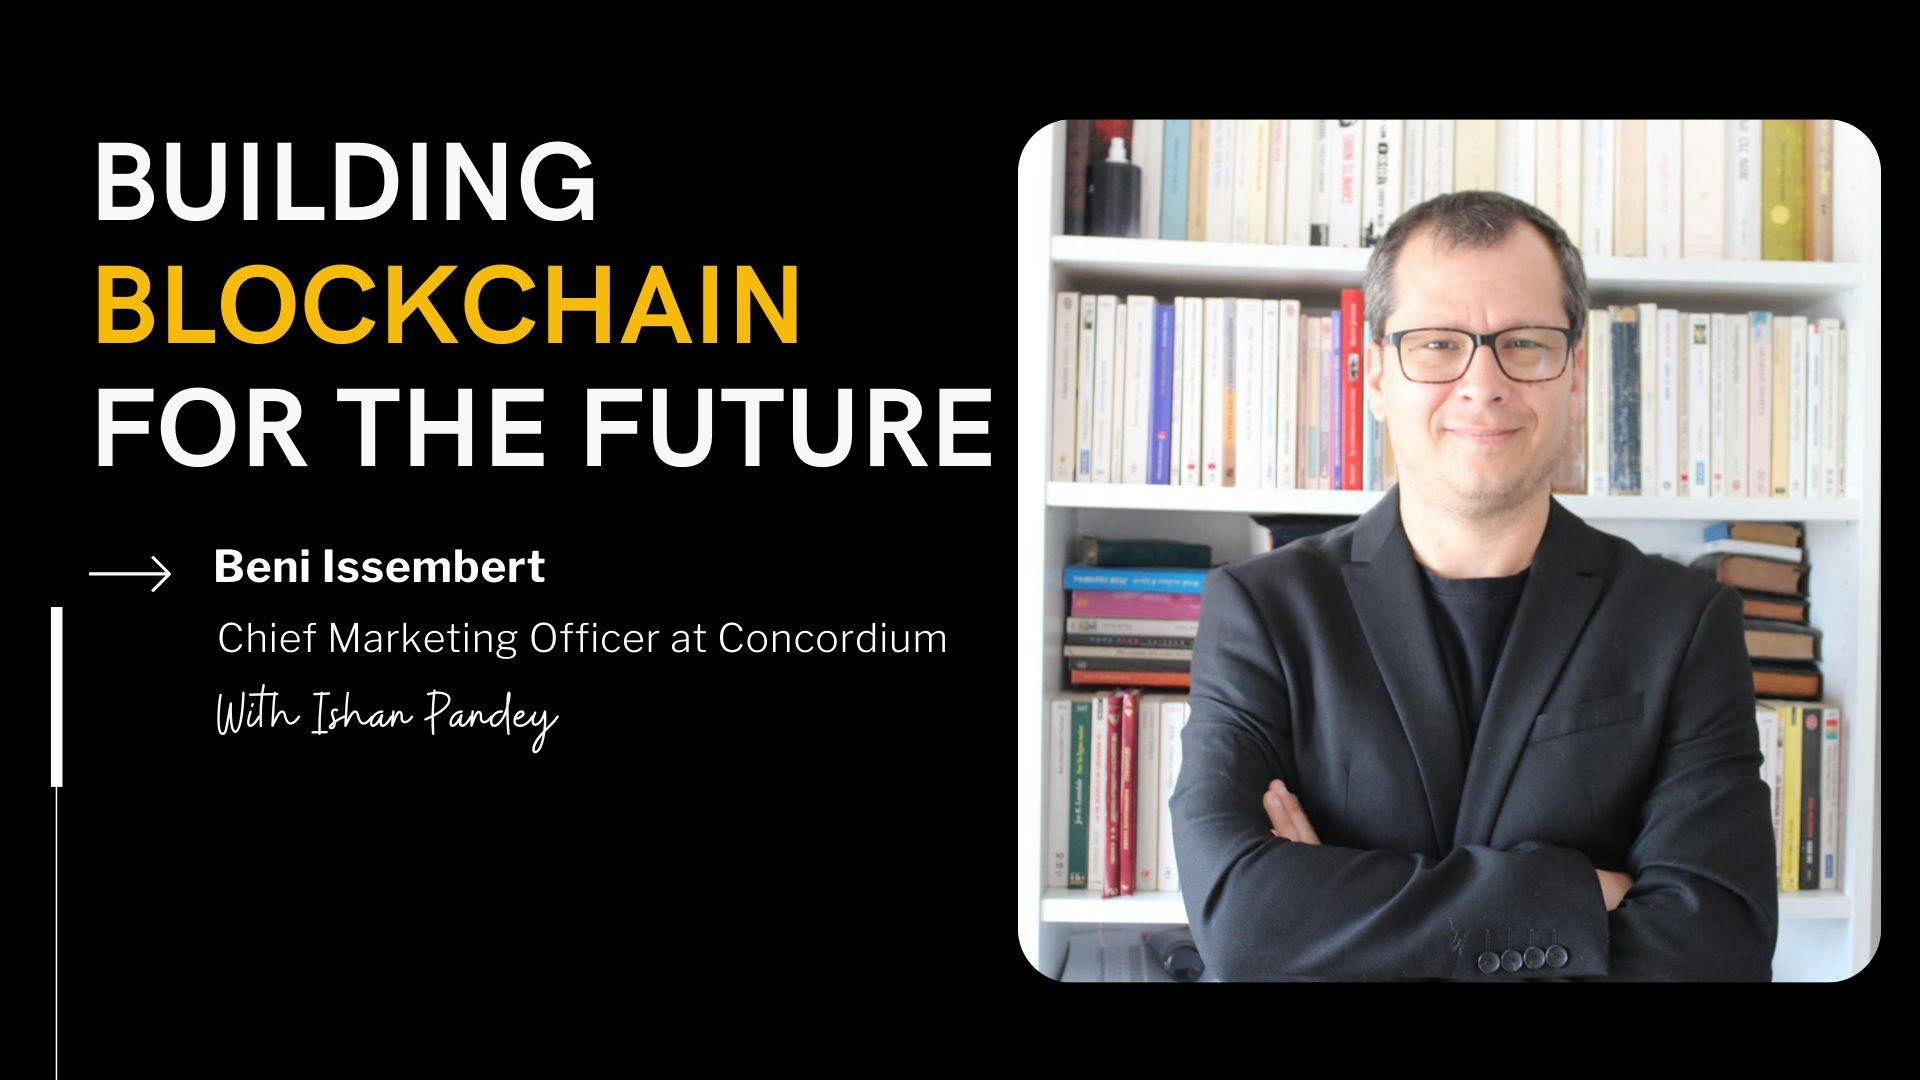 /compliance-by-design-is-the-future-of-blockchains-beni-issembert-cmo-at-concordium-pgk34ug feature image